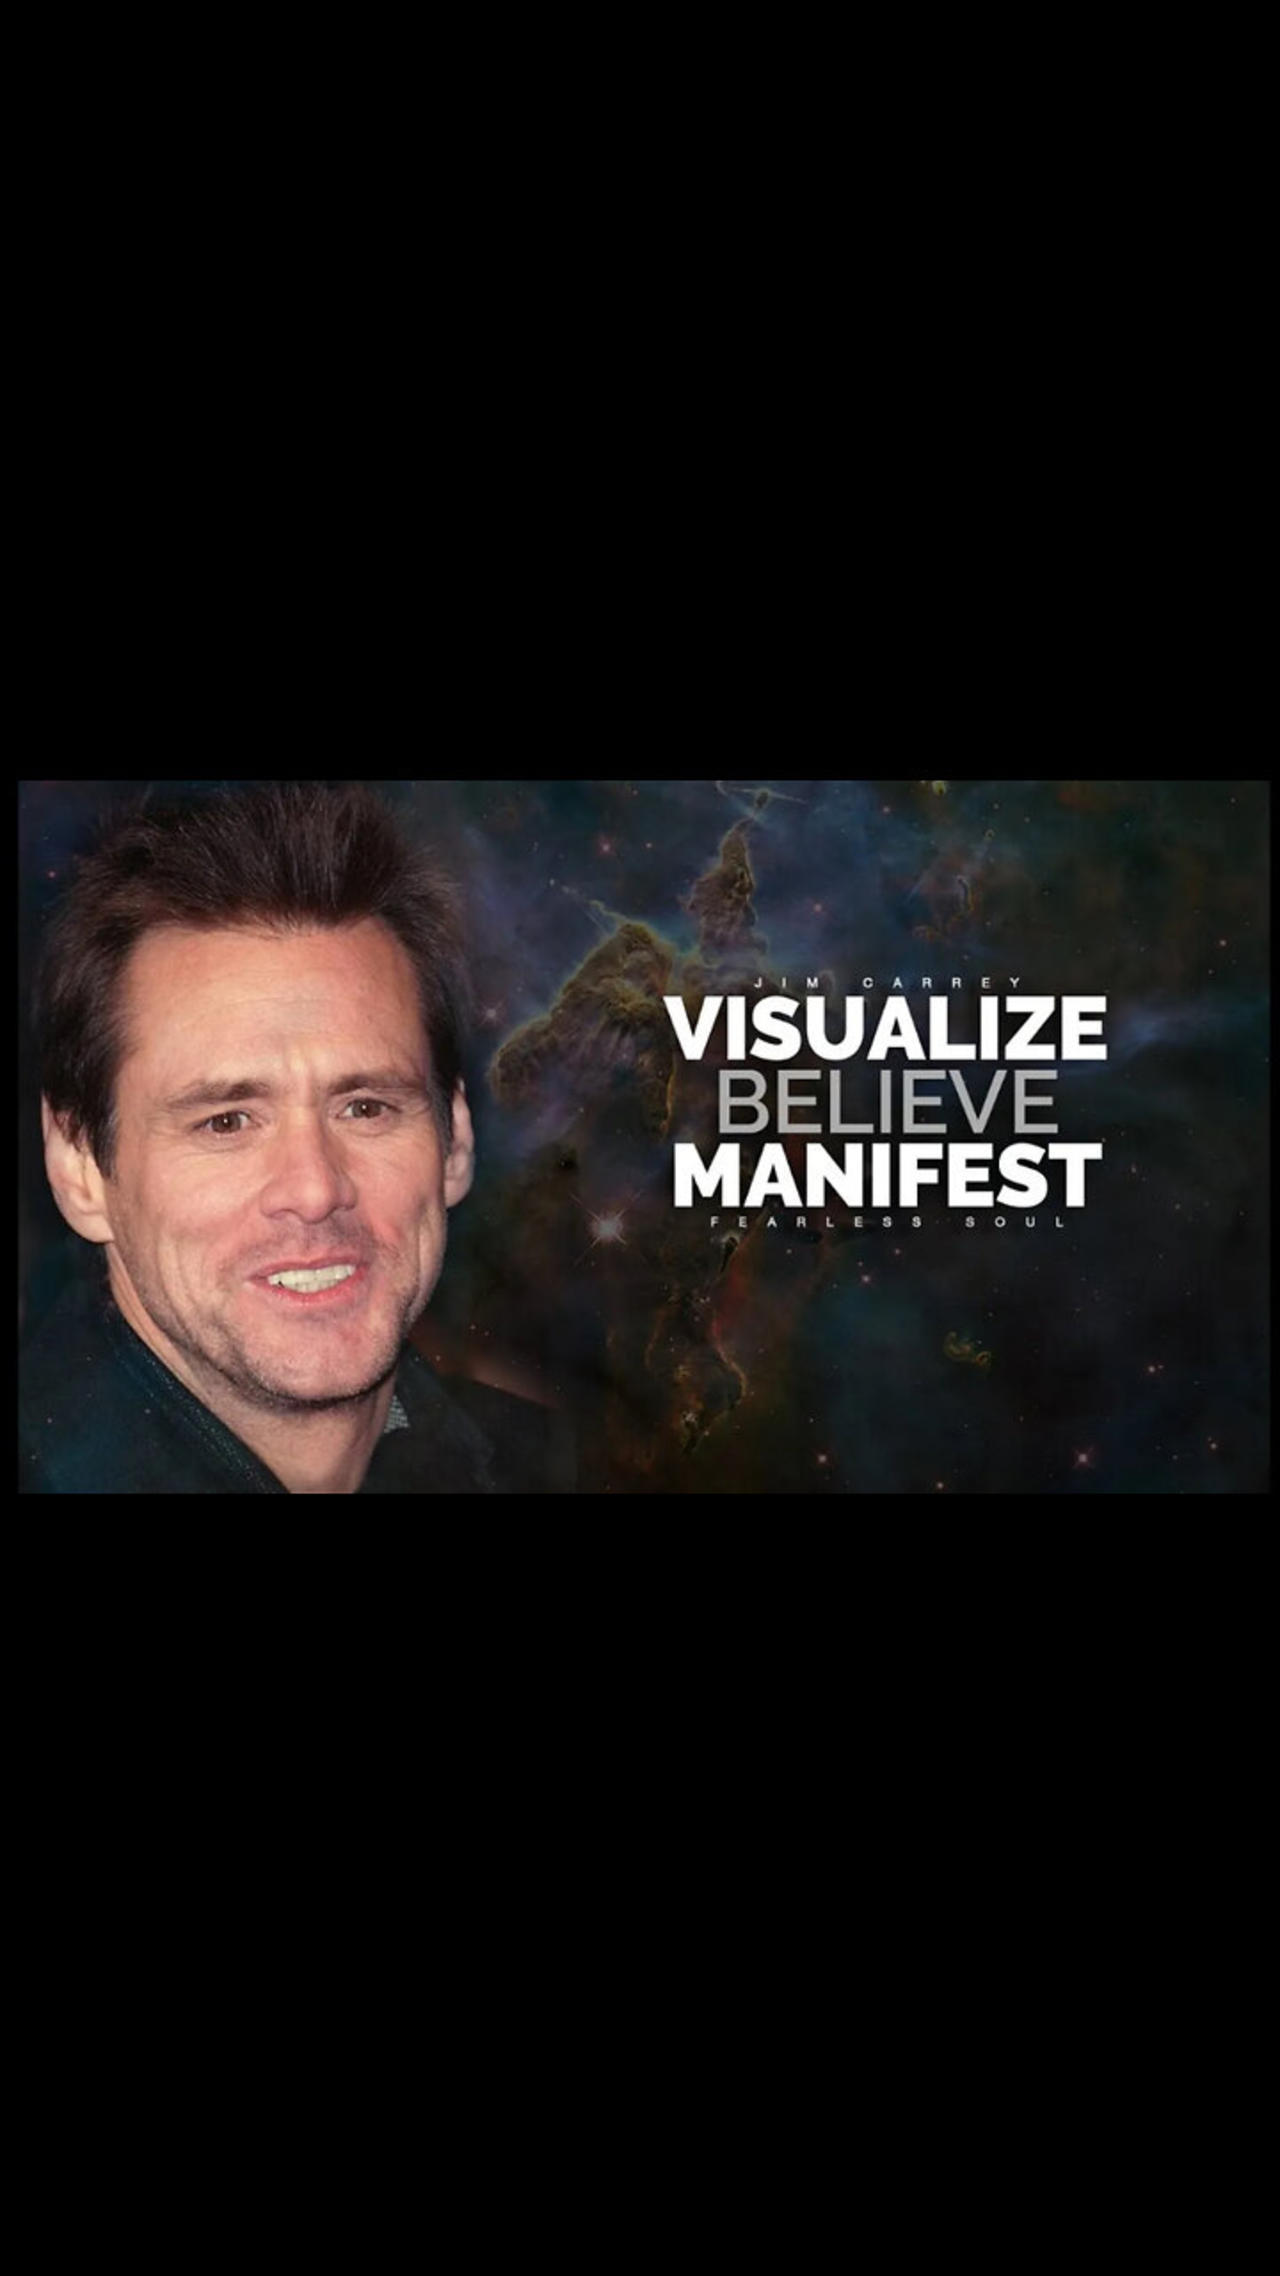 Jim Carrey - Visualize, Believe, Manifest (Law Of Attraction)